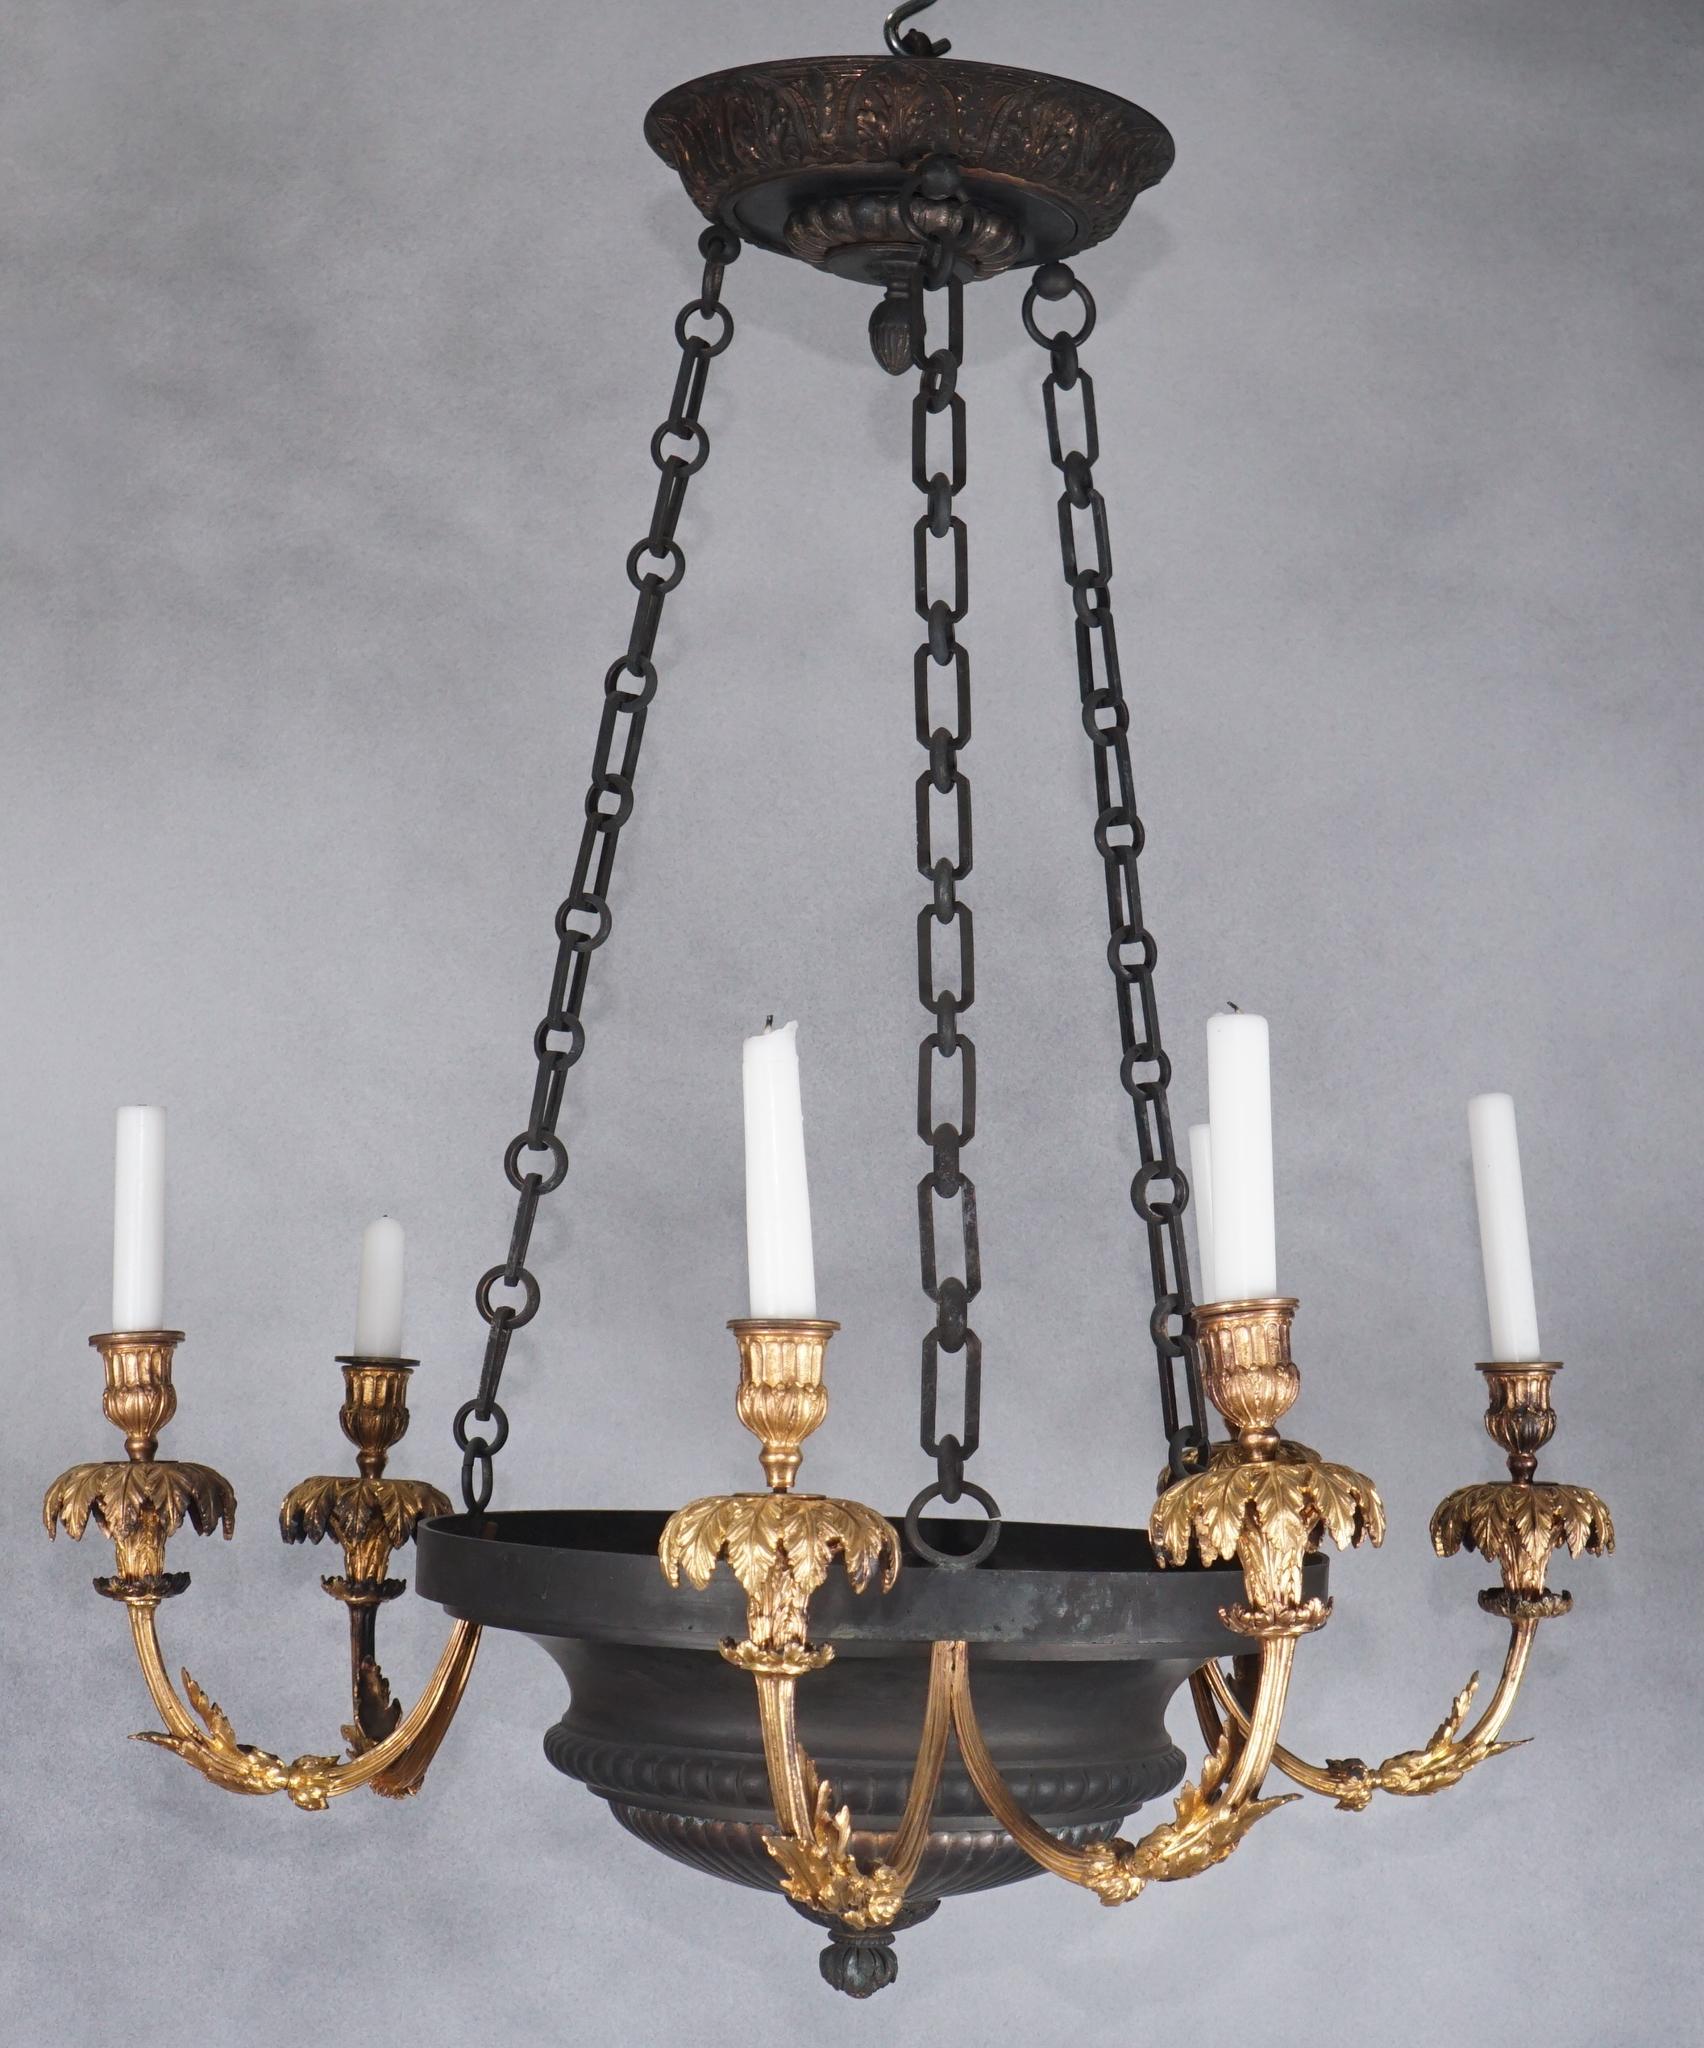 Designed as a shallow gadrooned bowl with six gilded bronze arms currently not wired and used as a candle fixture but can easily be wired for an additional charge if the customer desires. The arms exhibit some features that are similar to designs